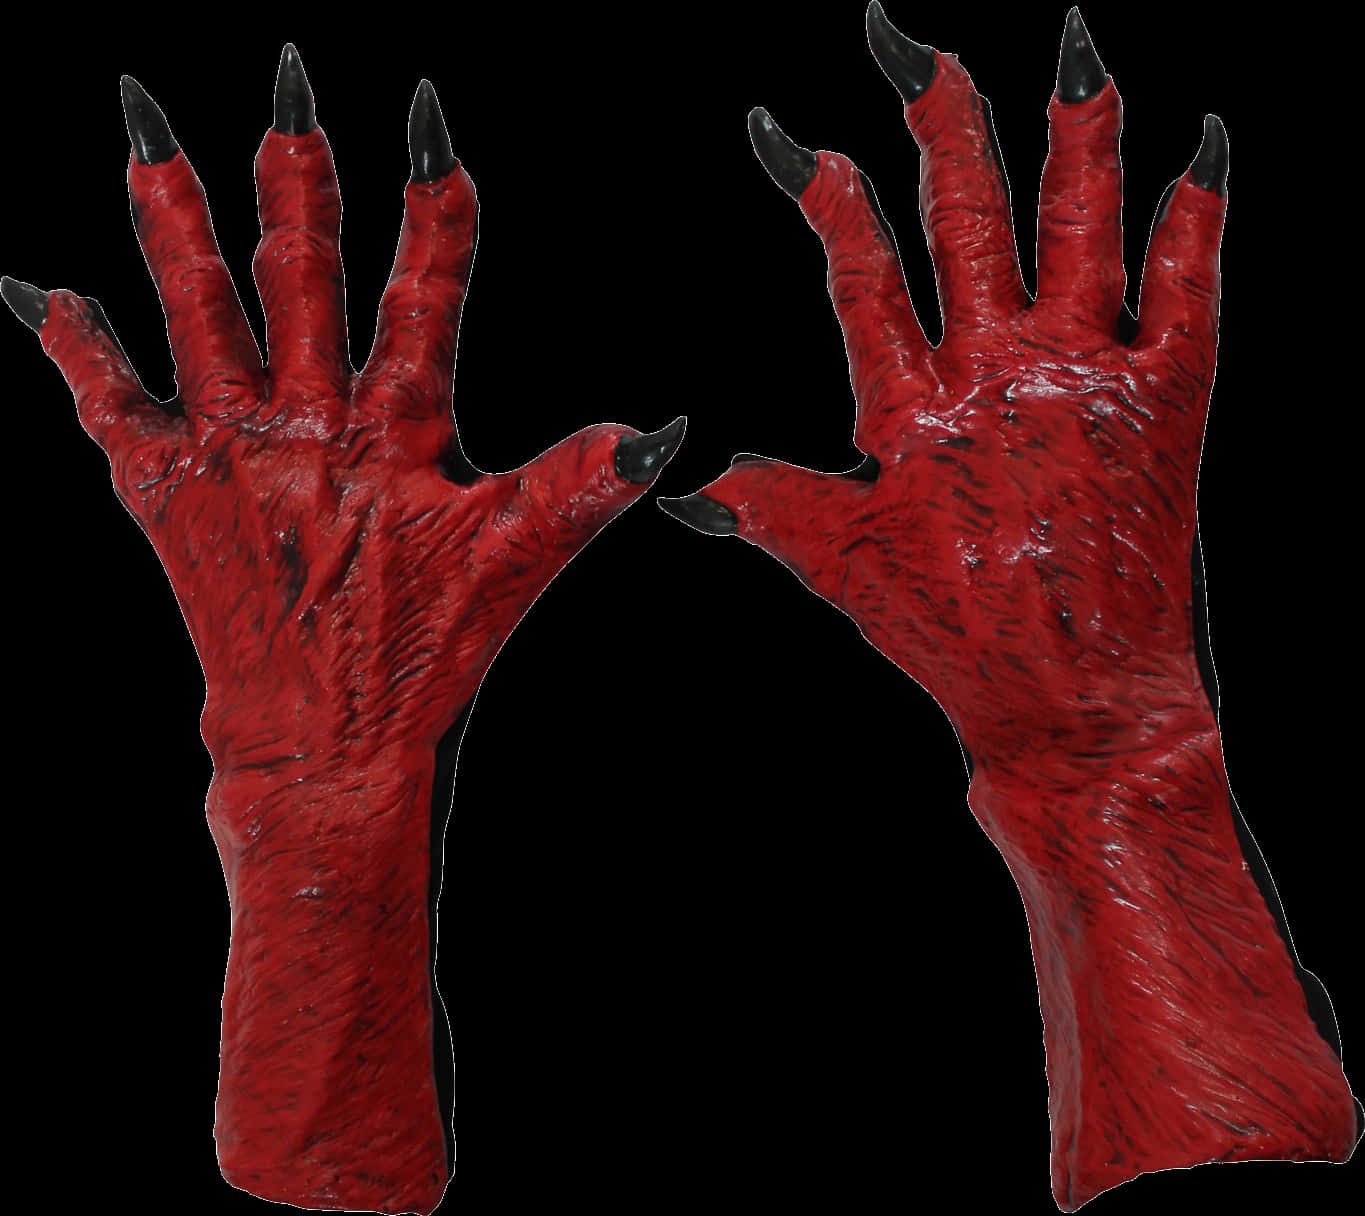 A Pair Of Red Hands With Black Claws